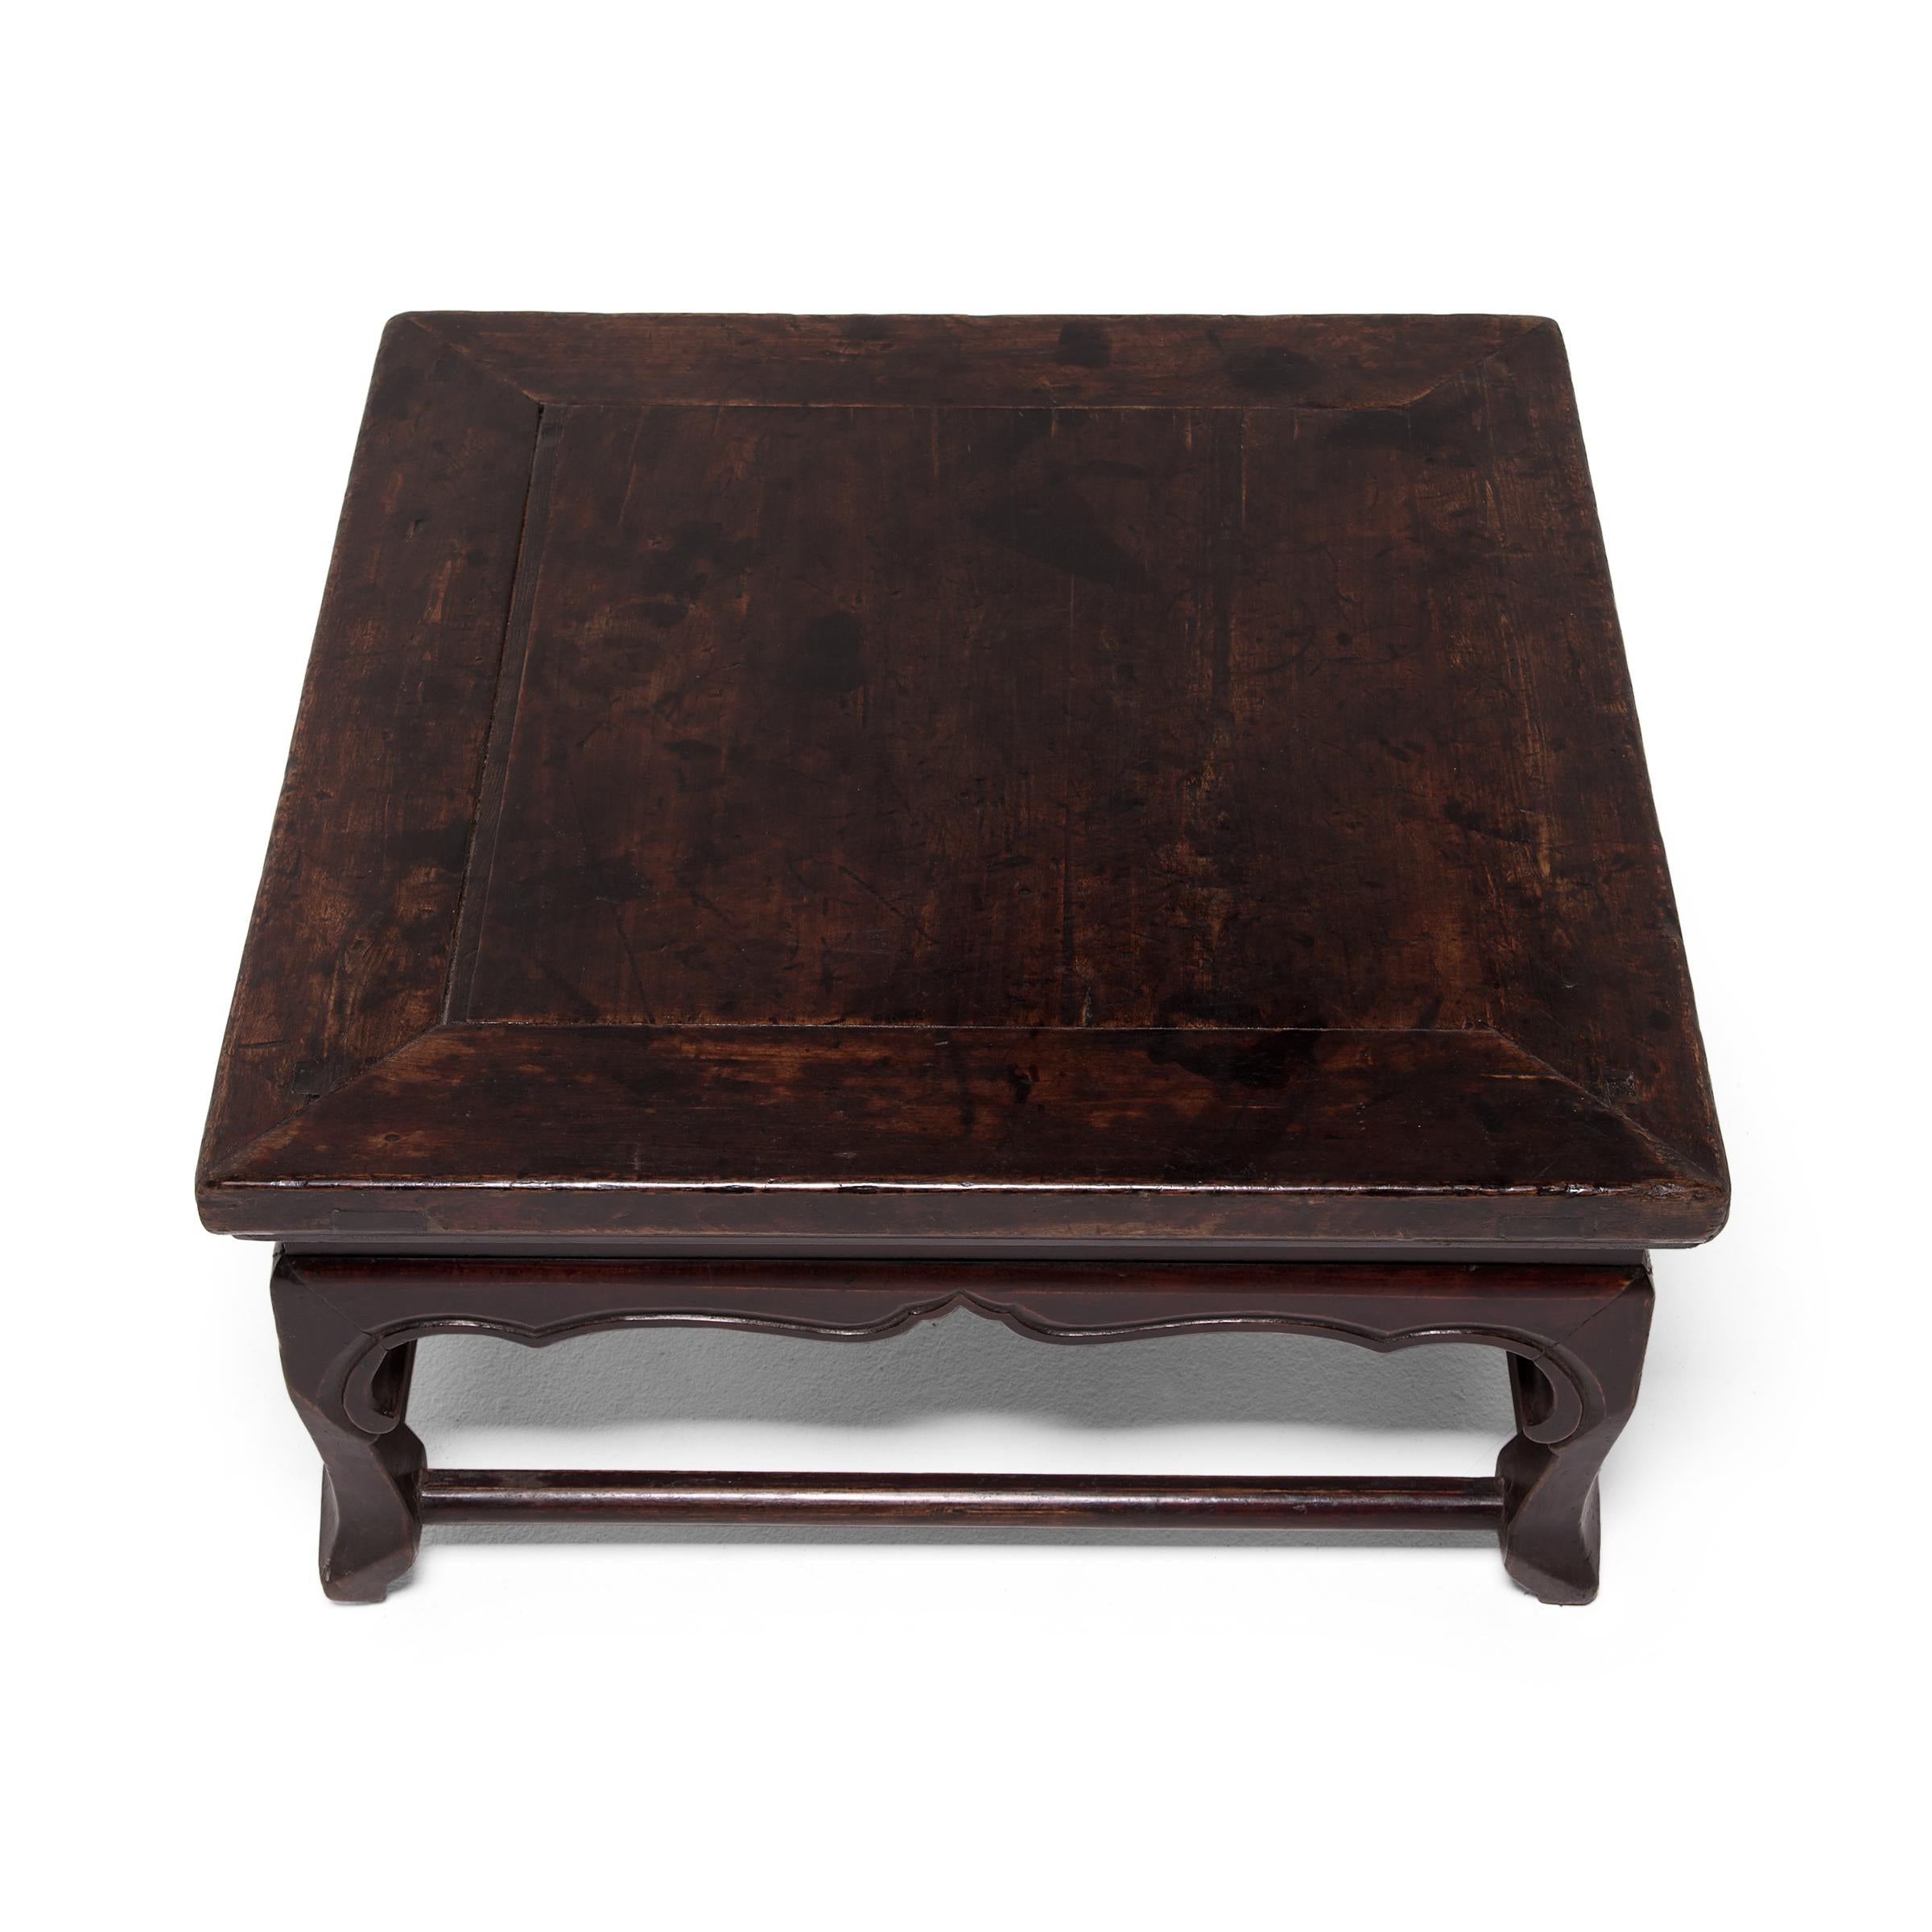 19th Century Chinese Low Waisted Kang Table, c. 1850